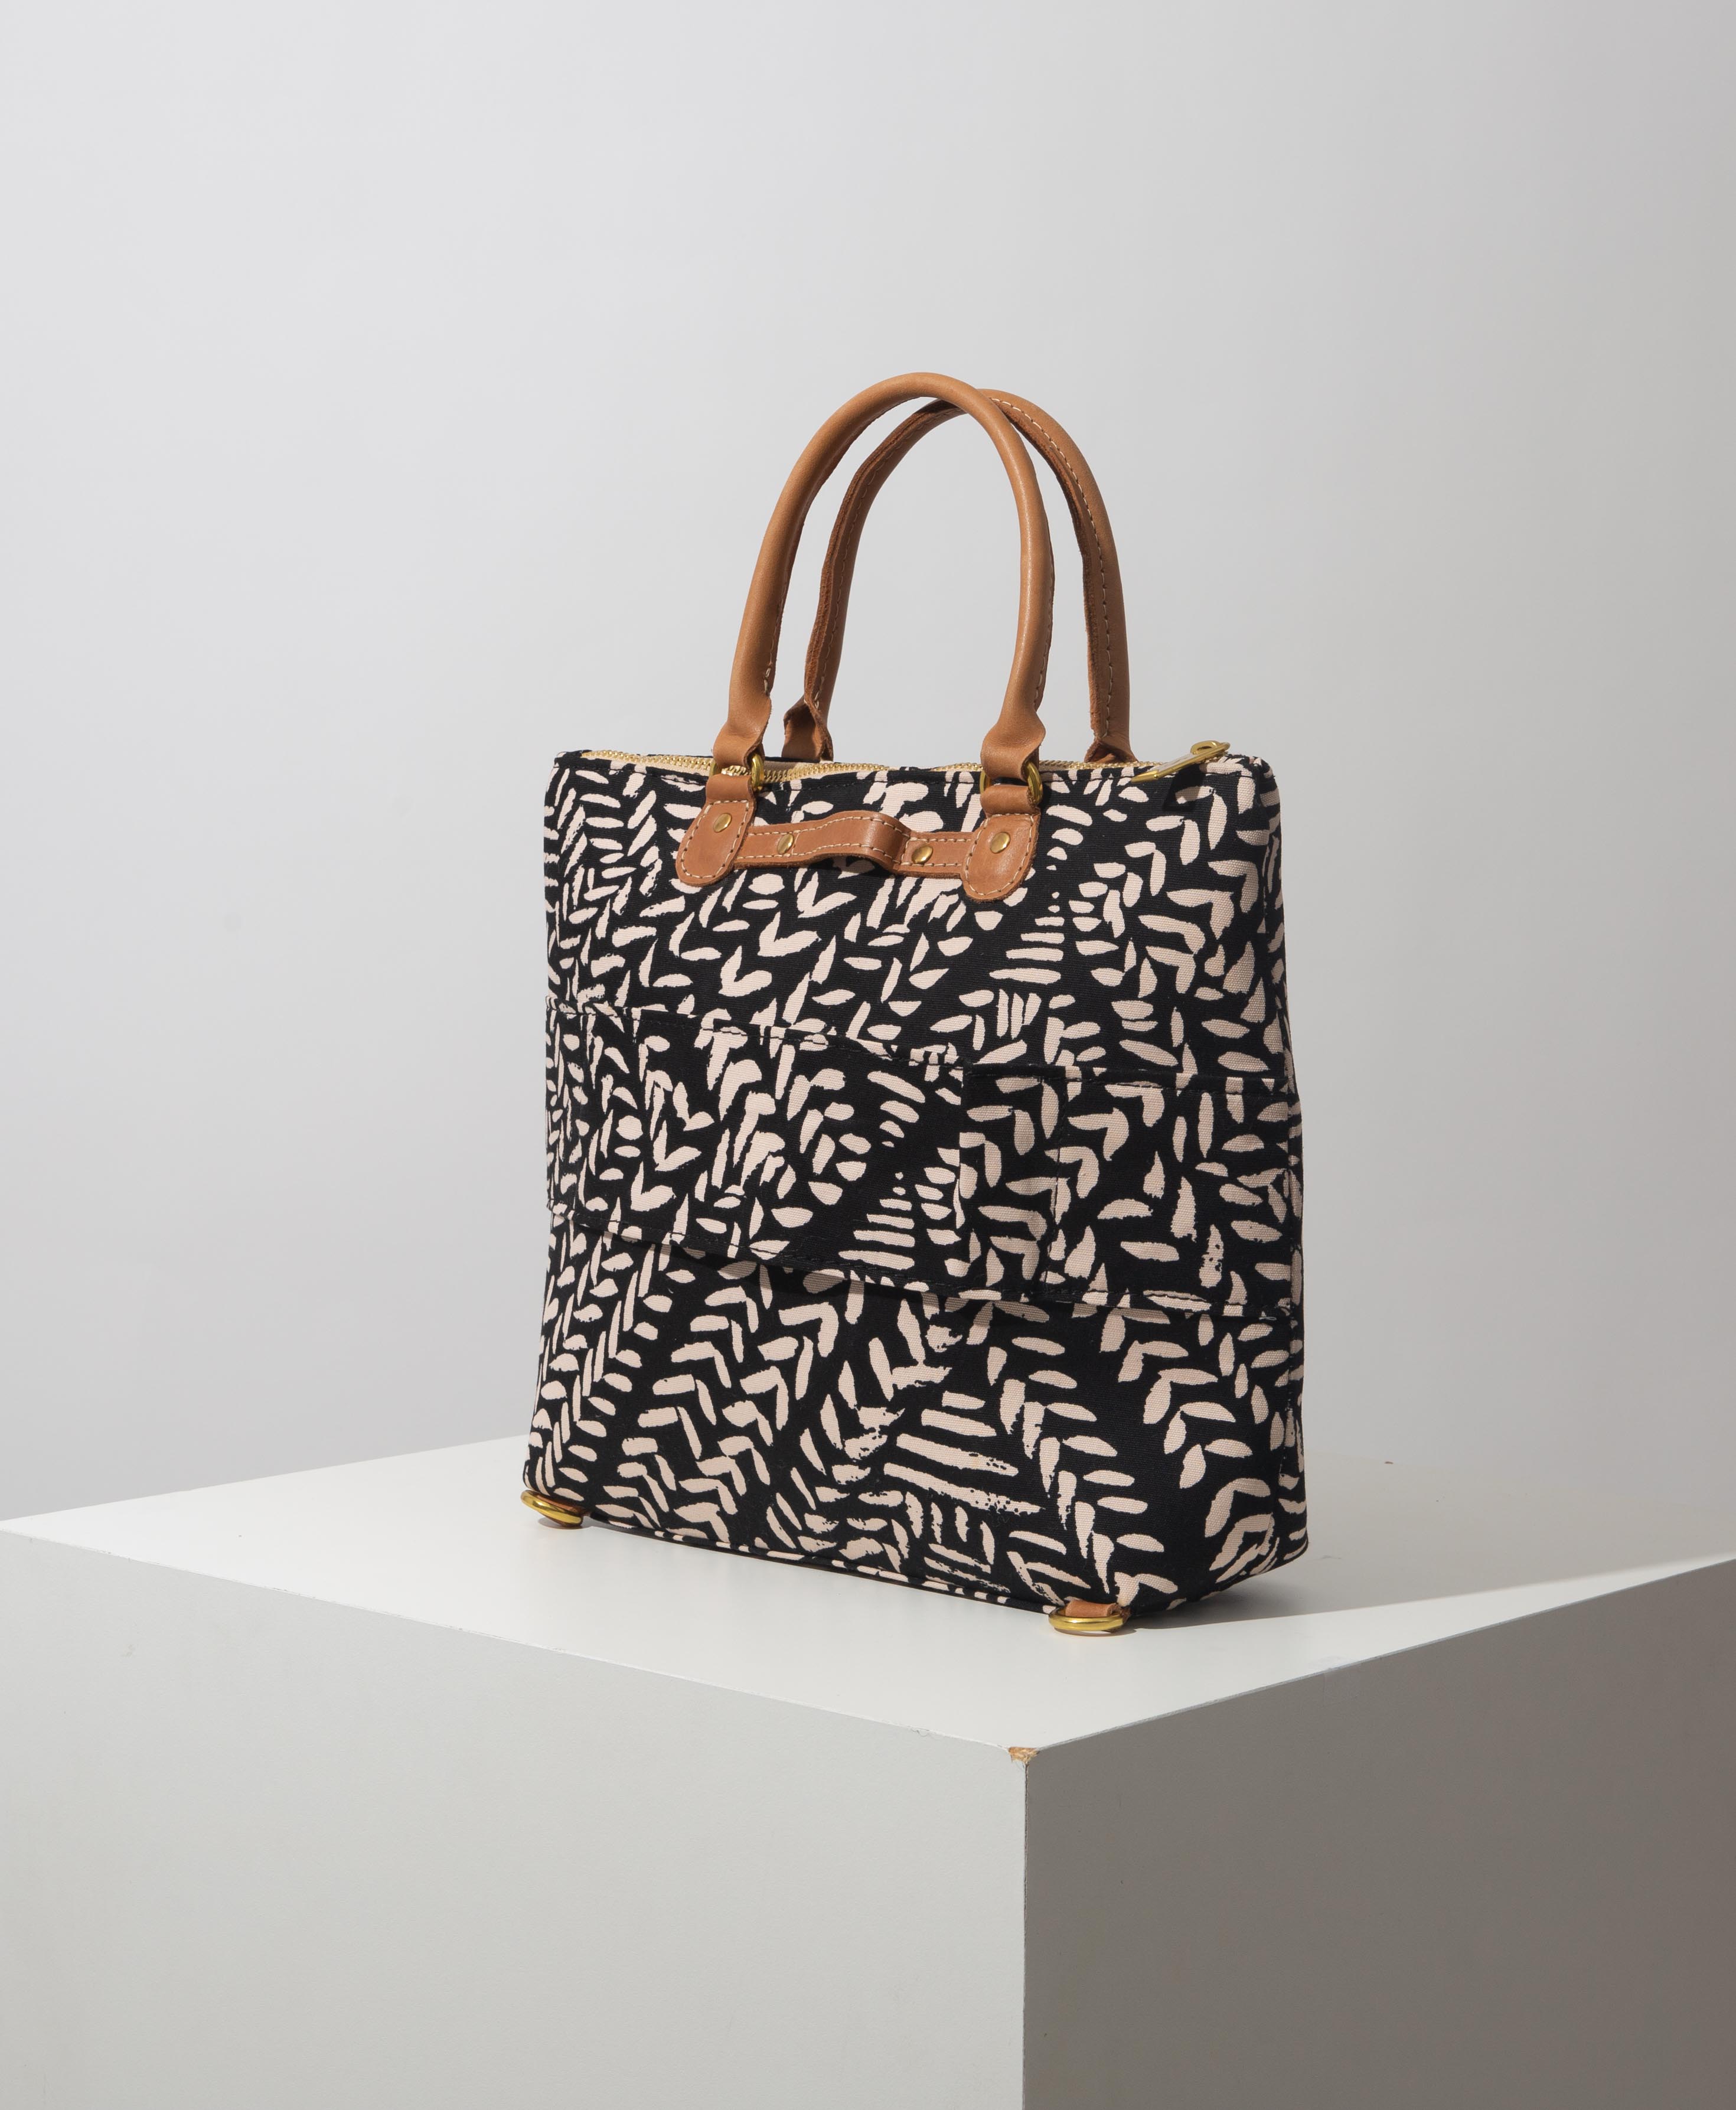 Black Snake Print Canvas Tote Bag New Look, Compare